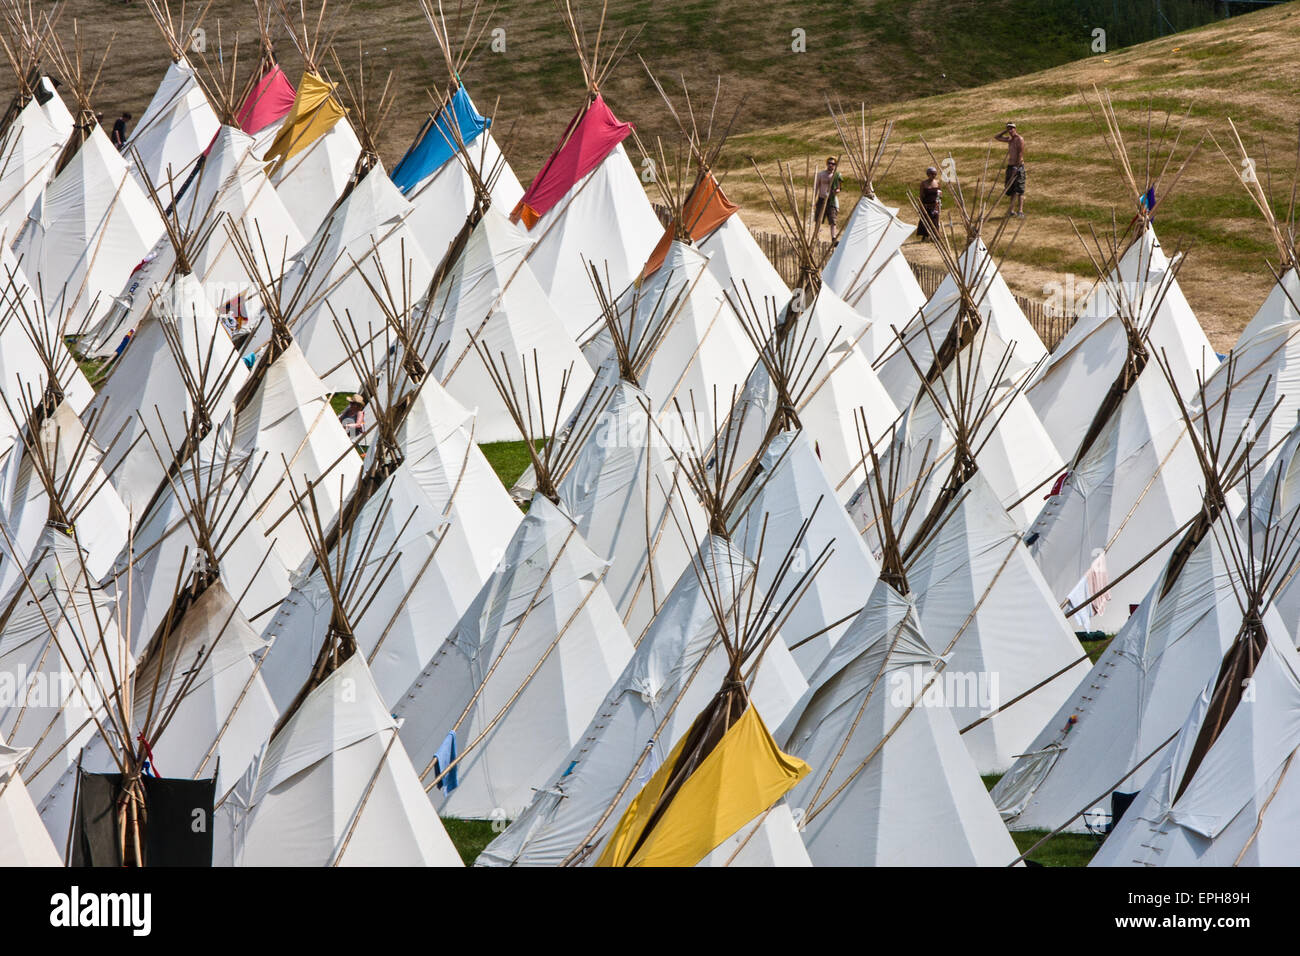 Glamping.Tepee/ tipi,wigwam, tents, available to hire at luxury tent teepee village/Tipi Field, an exclusive area, at, Glastonbury Festival,/ 'Glasto Stock Photo